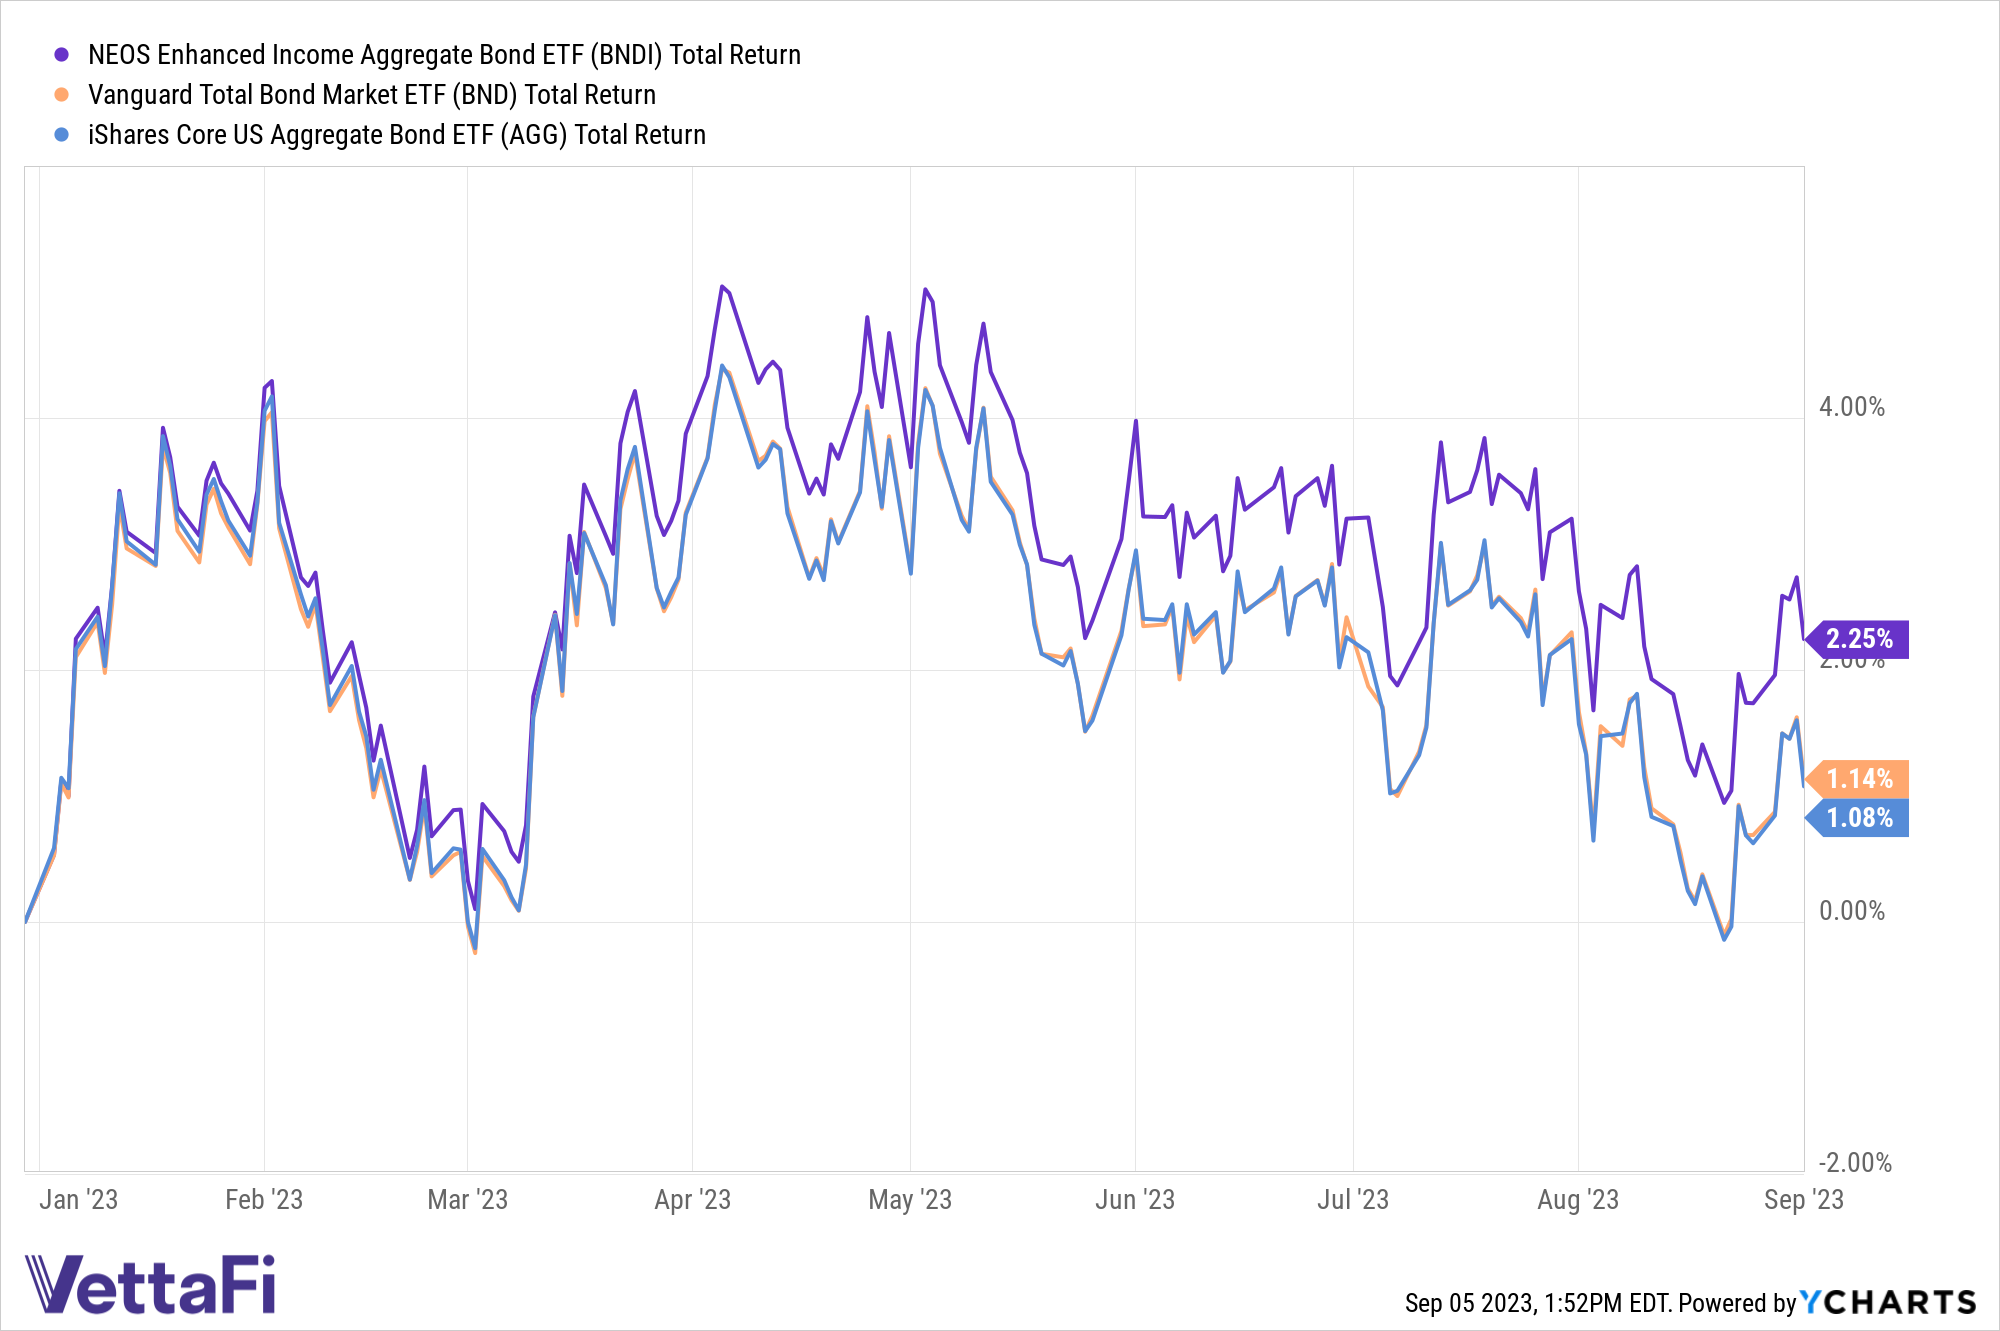 Total returns chart for the broad bonds market YTD, including BNDI (up 2.25%), BND (up 1.14%), and AGG (up 1.08%). 